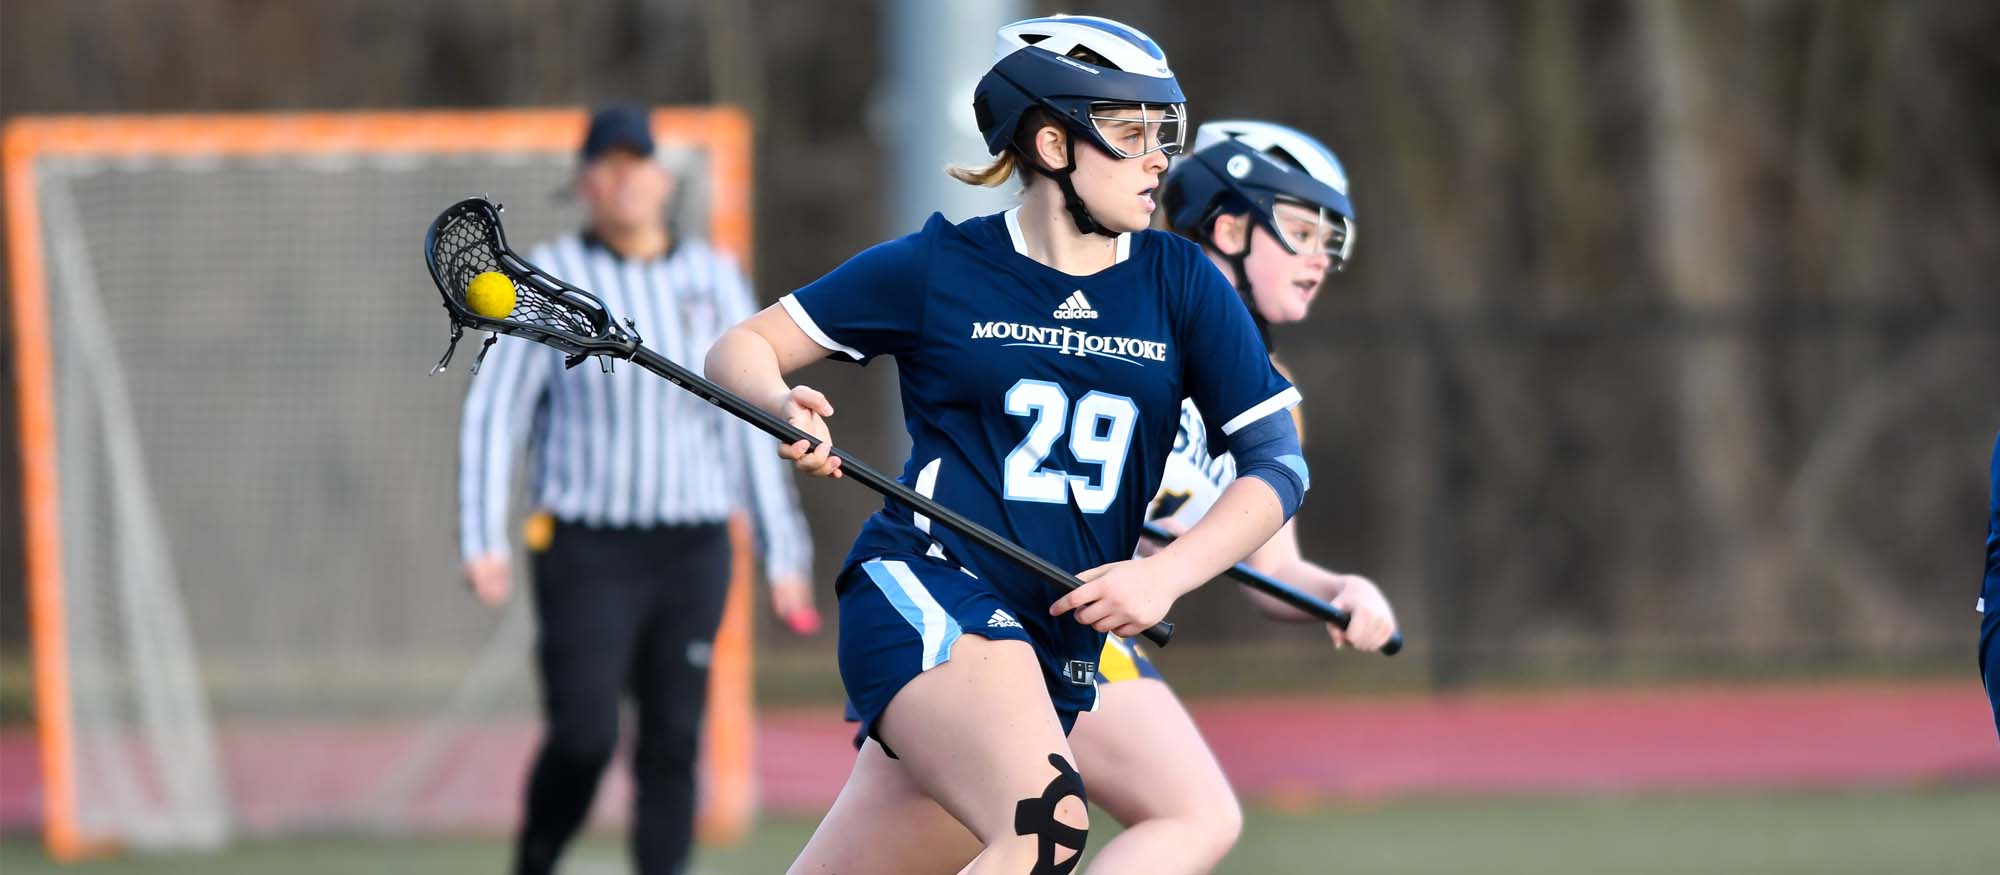 Four Lacrosse Student-Athletes Net Hat Trick to Cruise to a 20-5 Victory Over MCLA